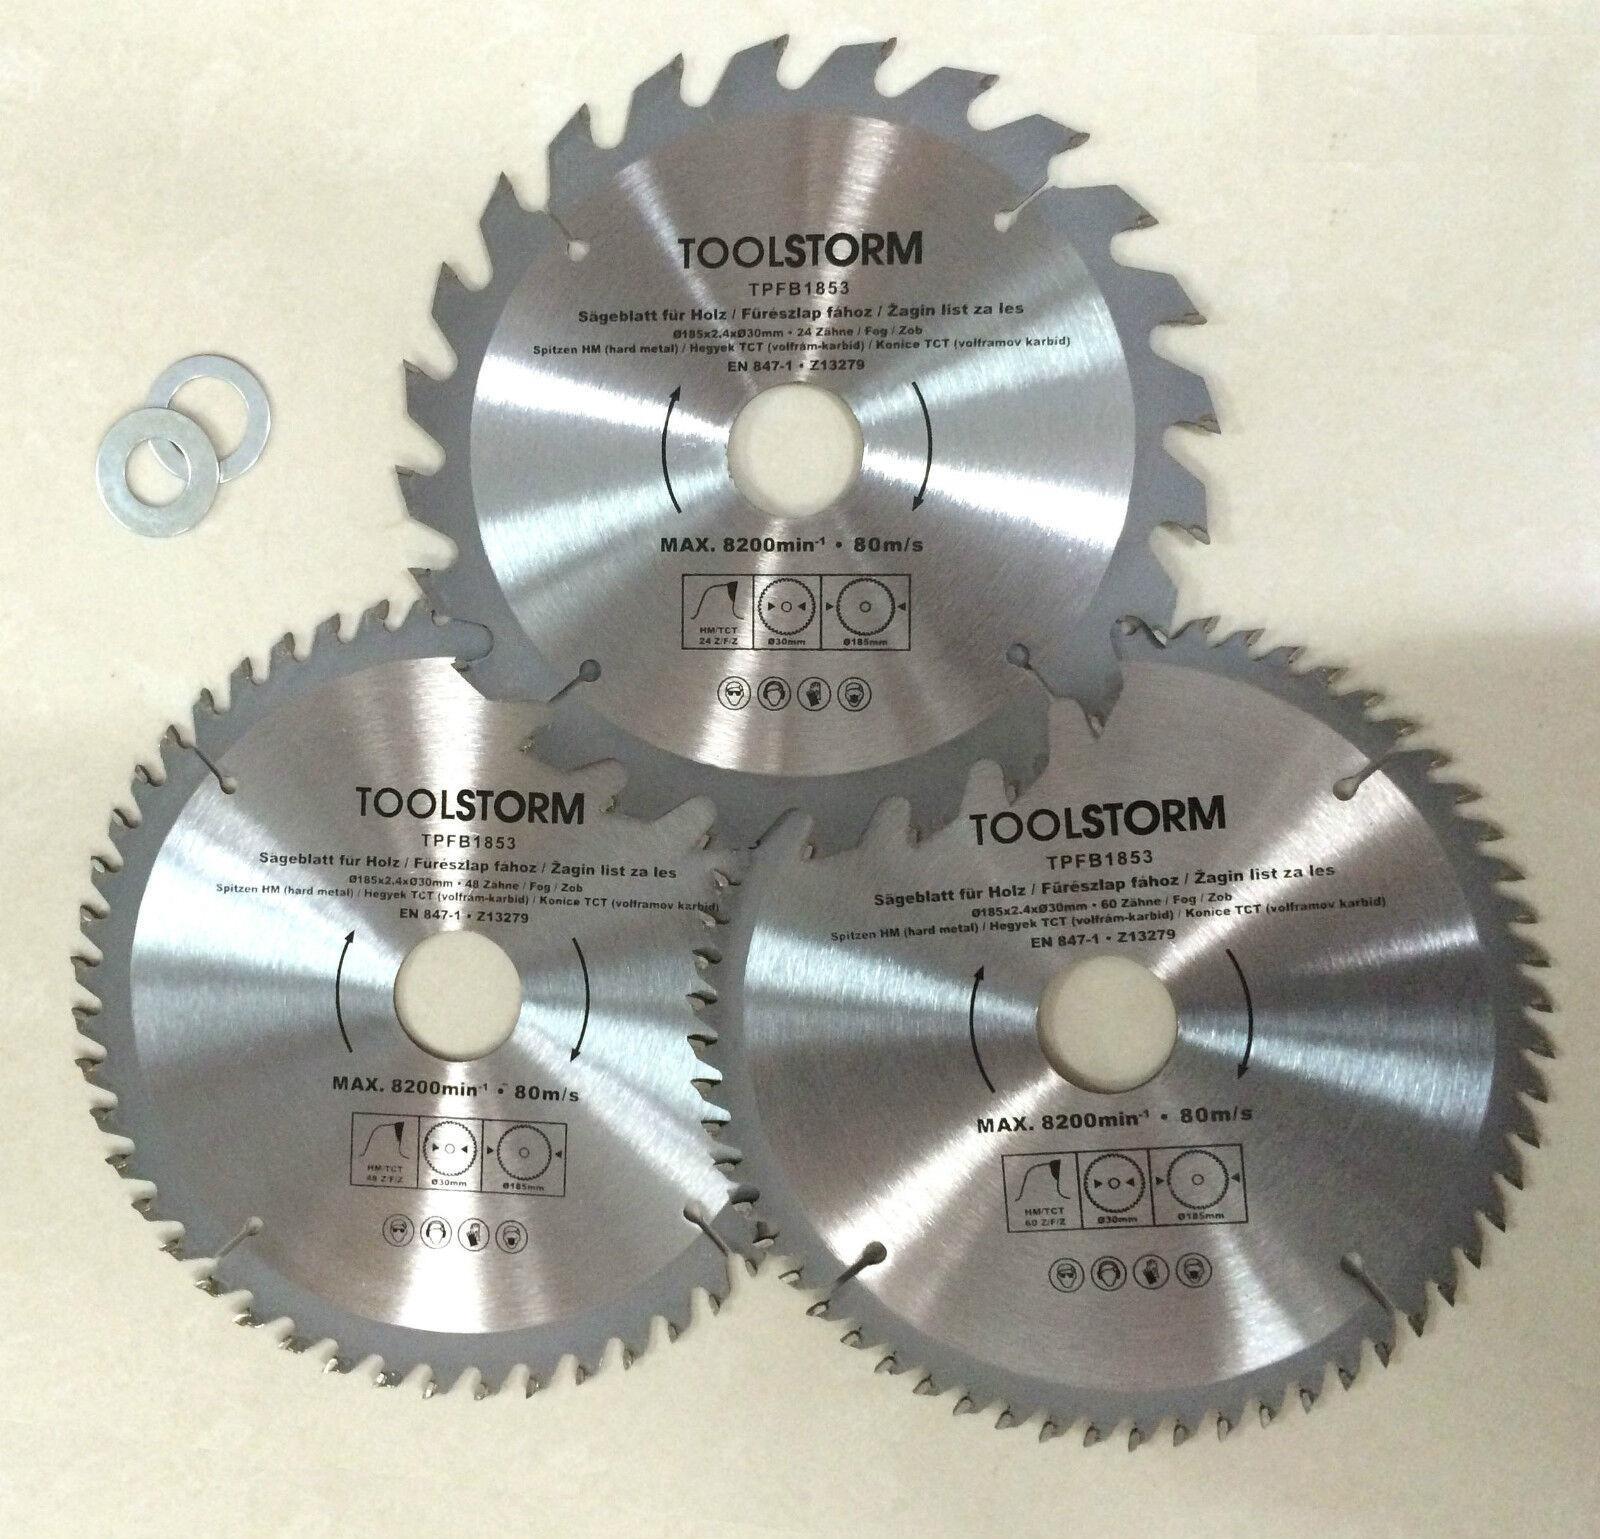 3PC Circular Saw Blades 185mm 24T,48T,60Teeth 30MM BORE With 3 Reduction